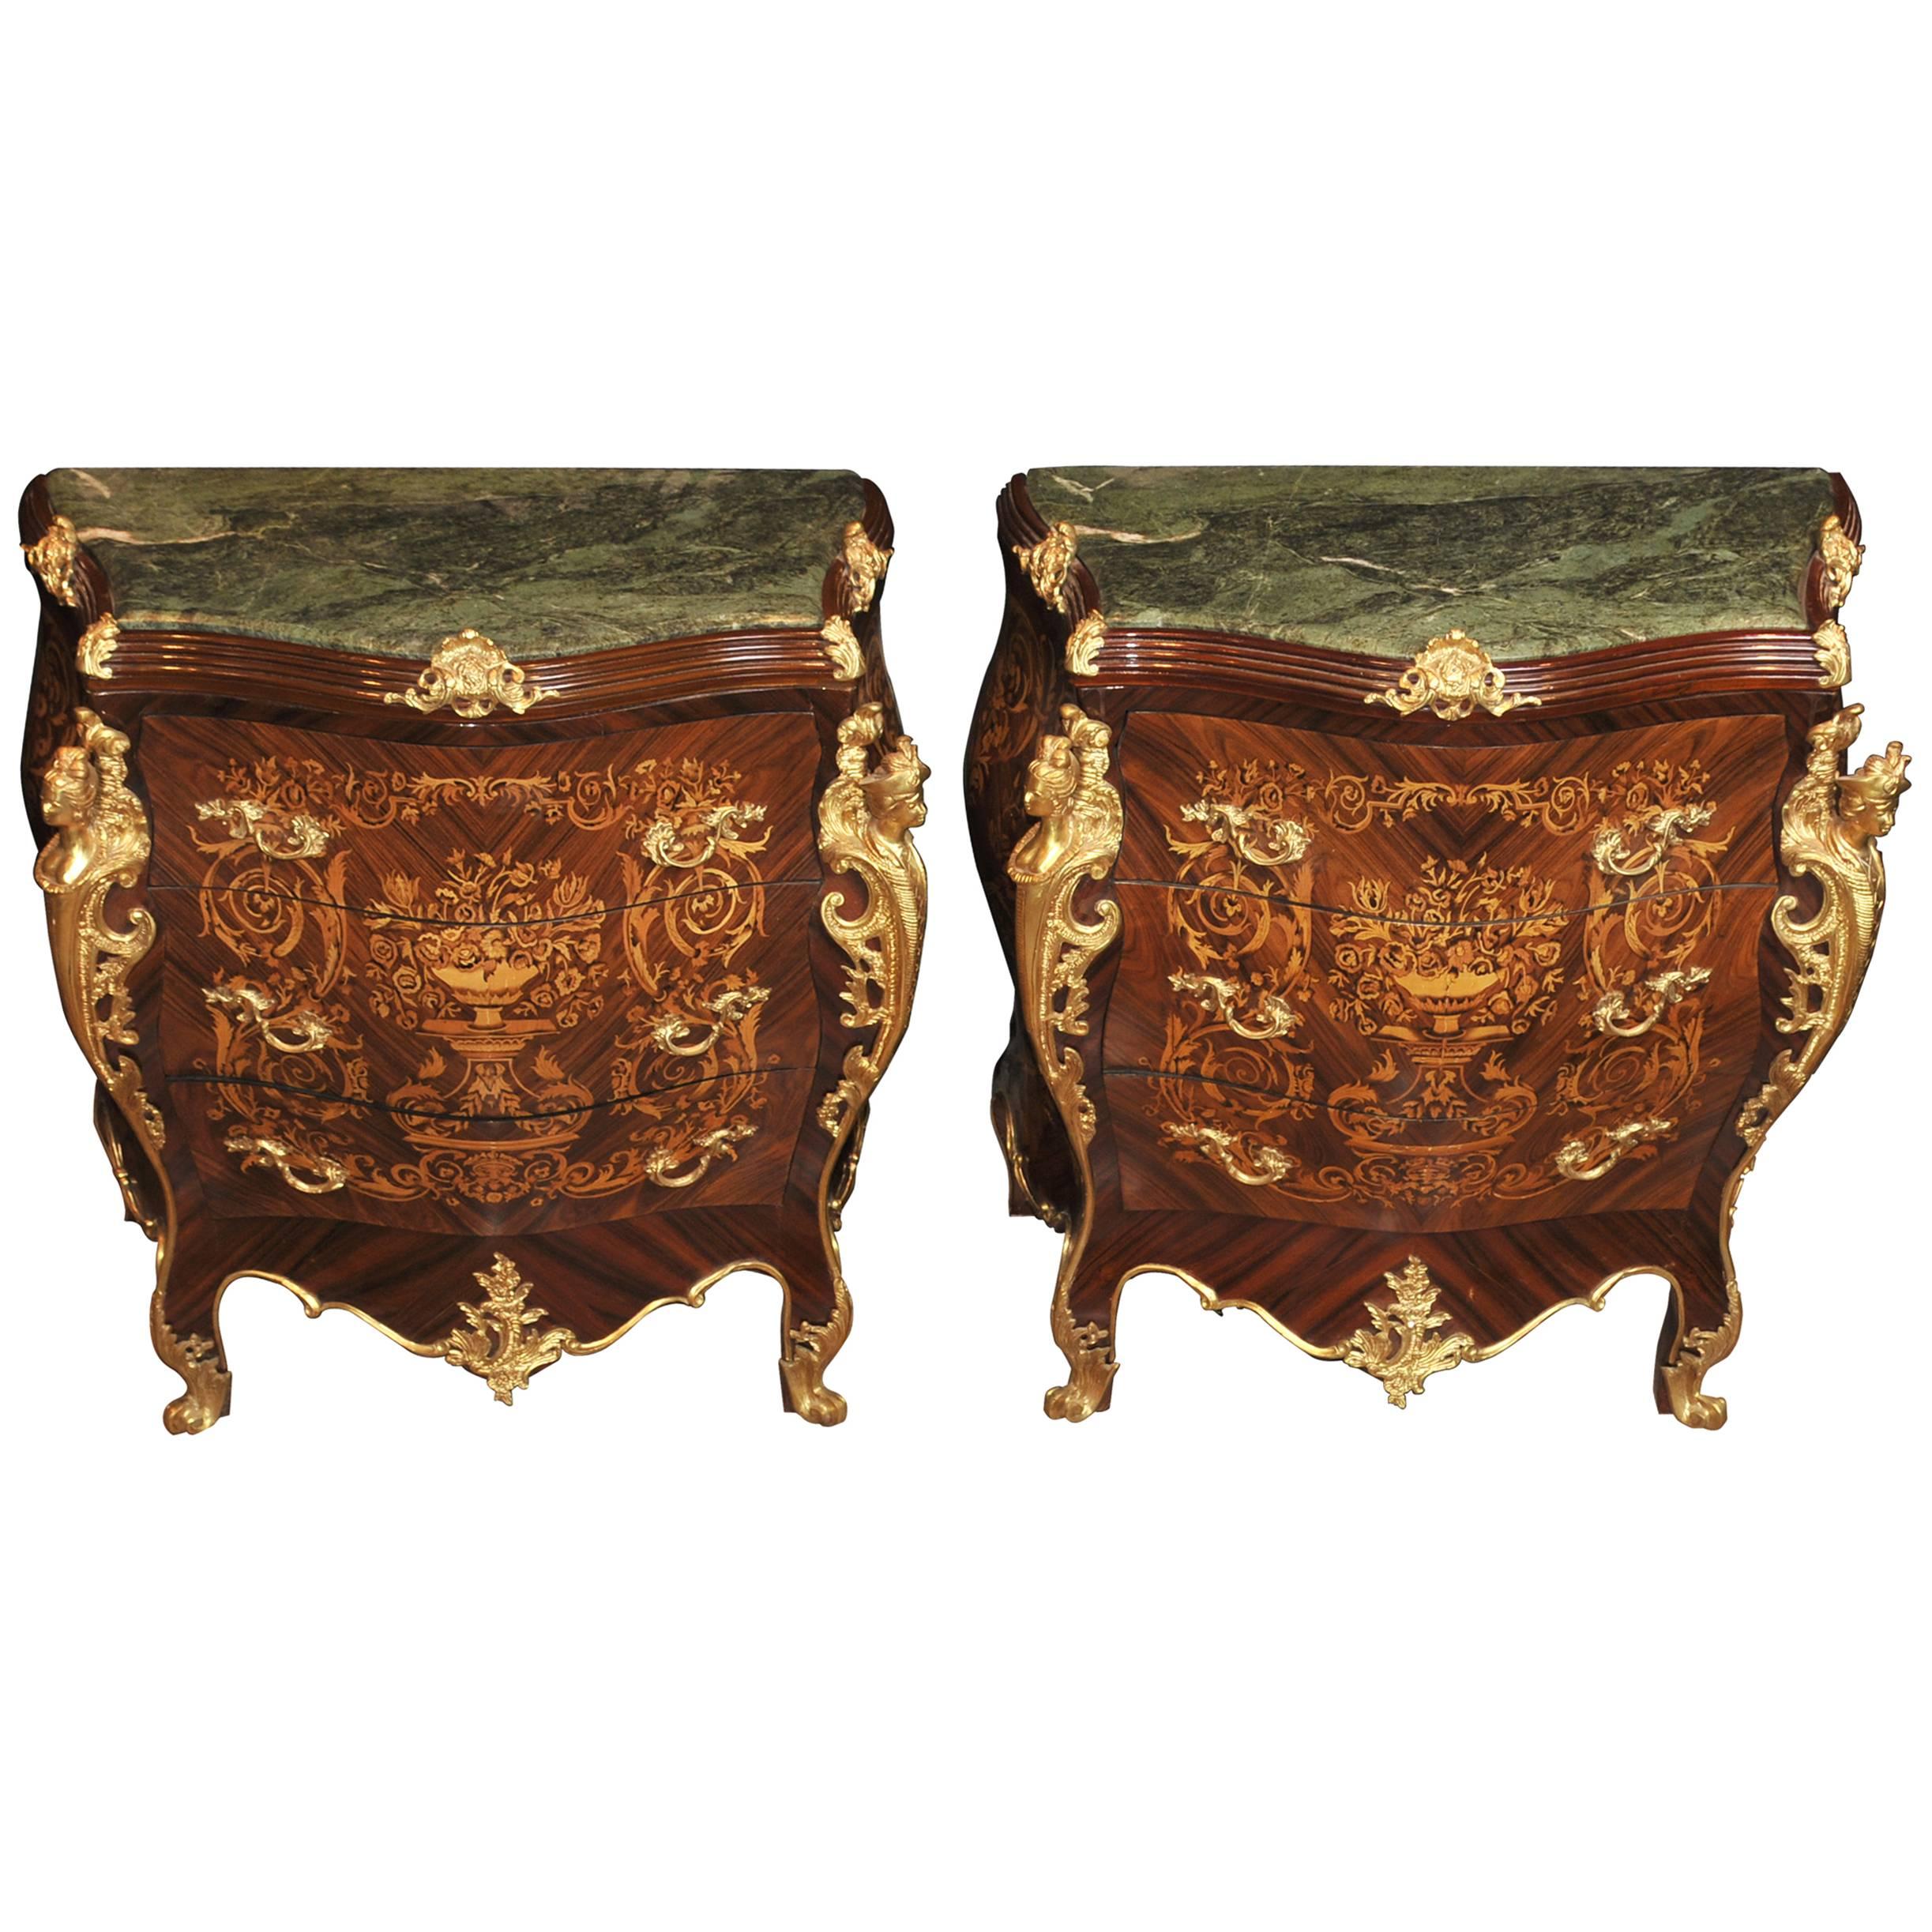 Pair of Louis XVI Bombe Commodes Chests of Drawers Marquetry Inlay